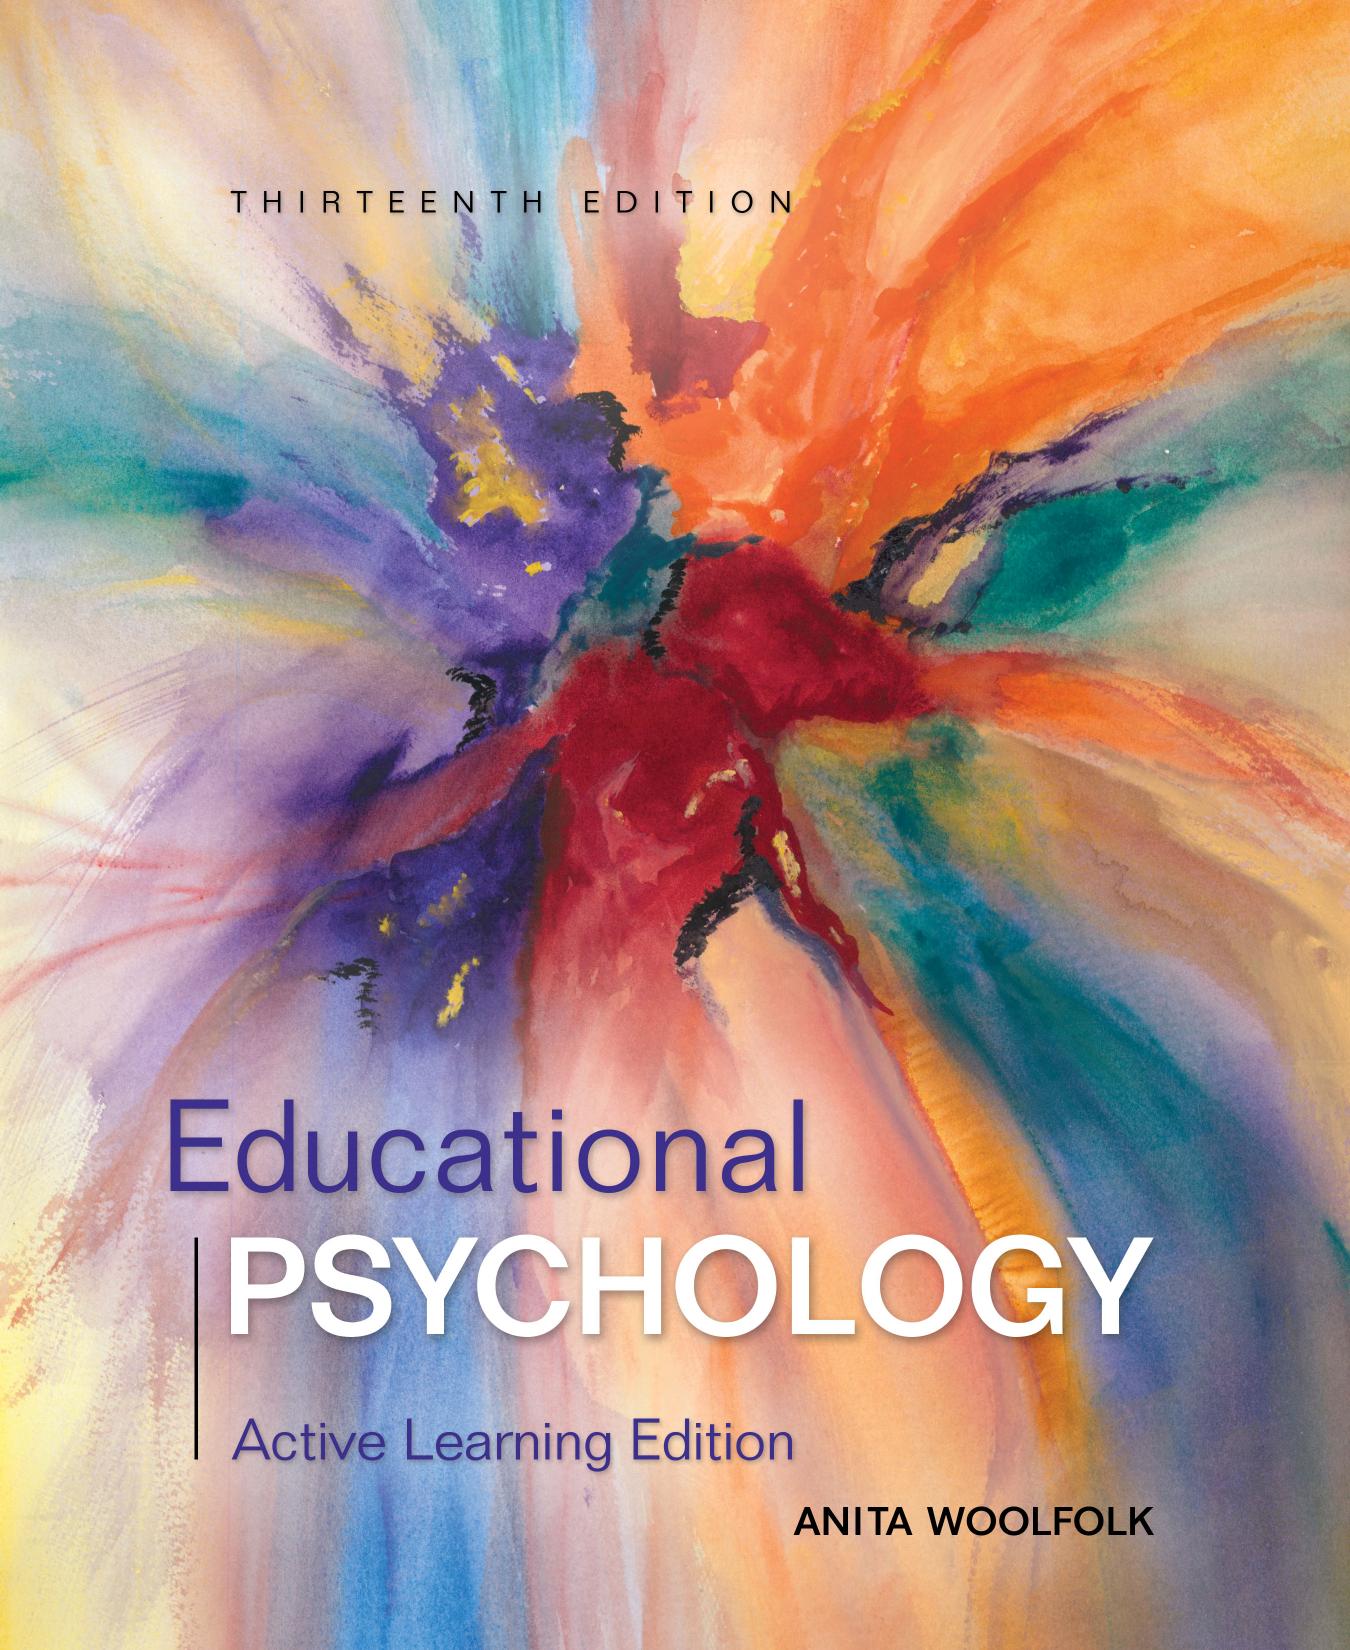 Educational Psychology Active Learning Edition 13th Edition by Anita Woolfolk.jpg